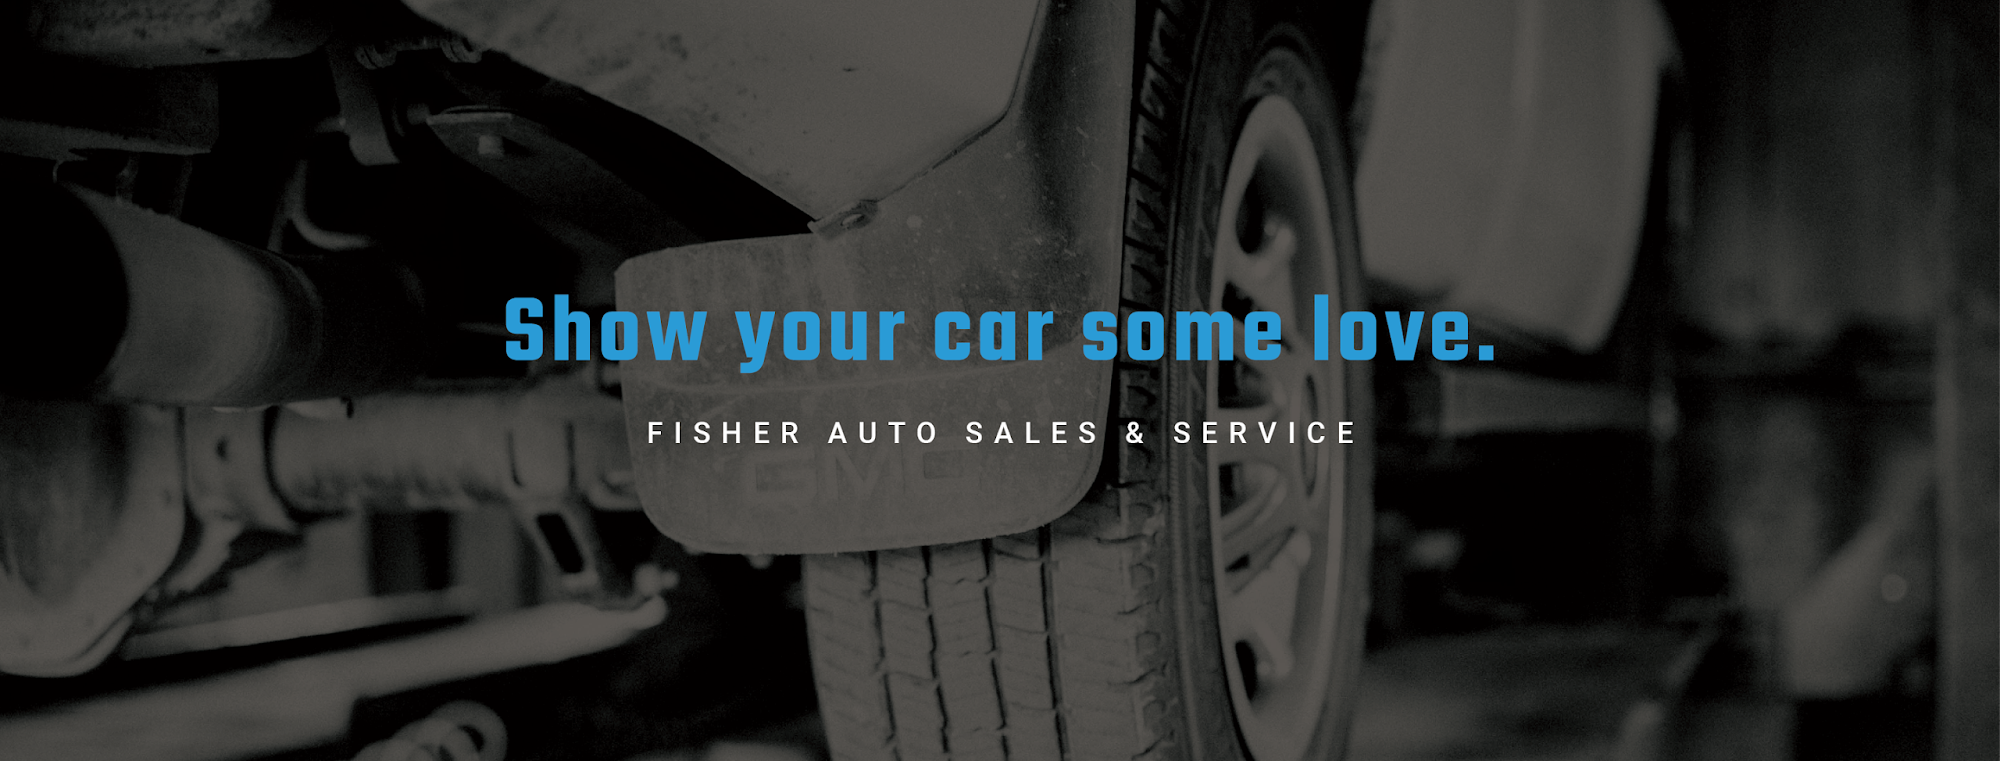 Fisher Auto Sales and Service